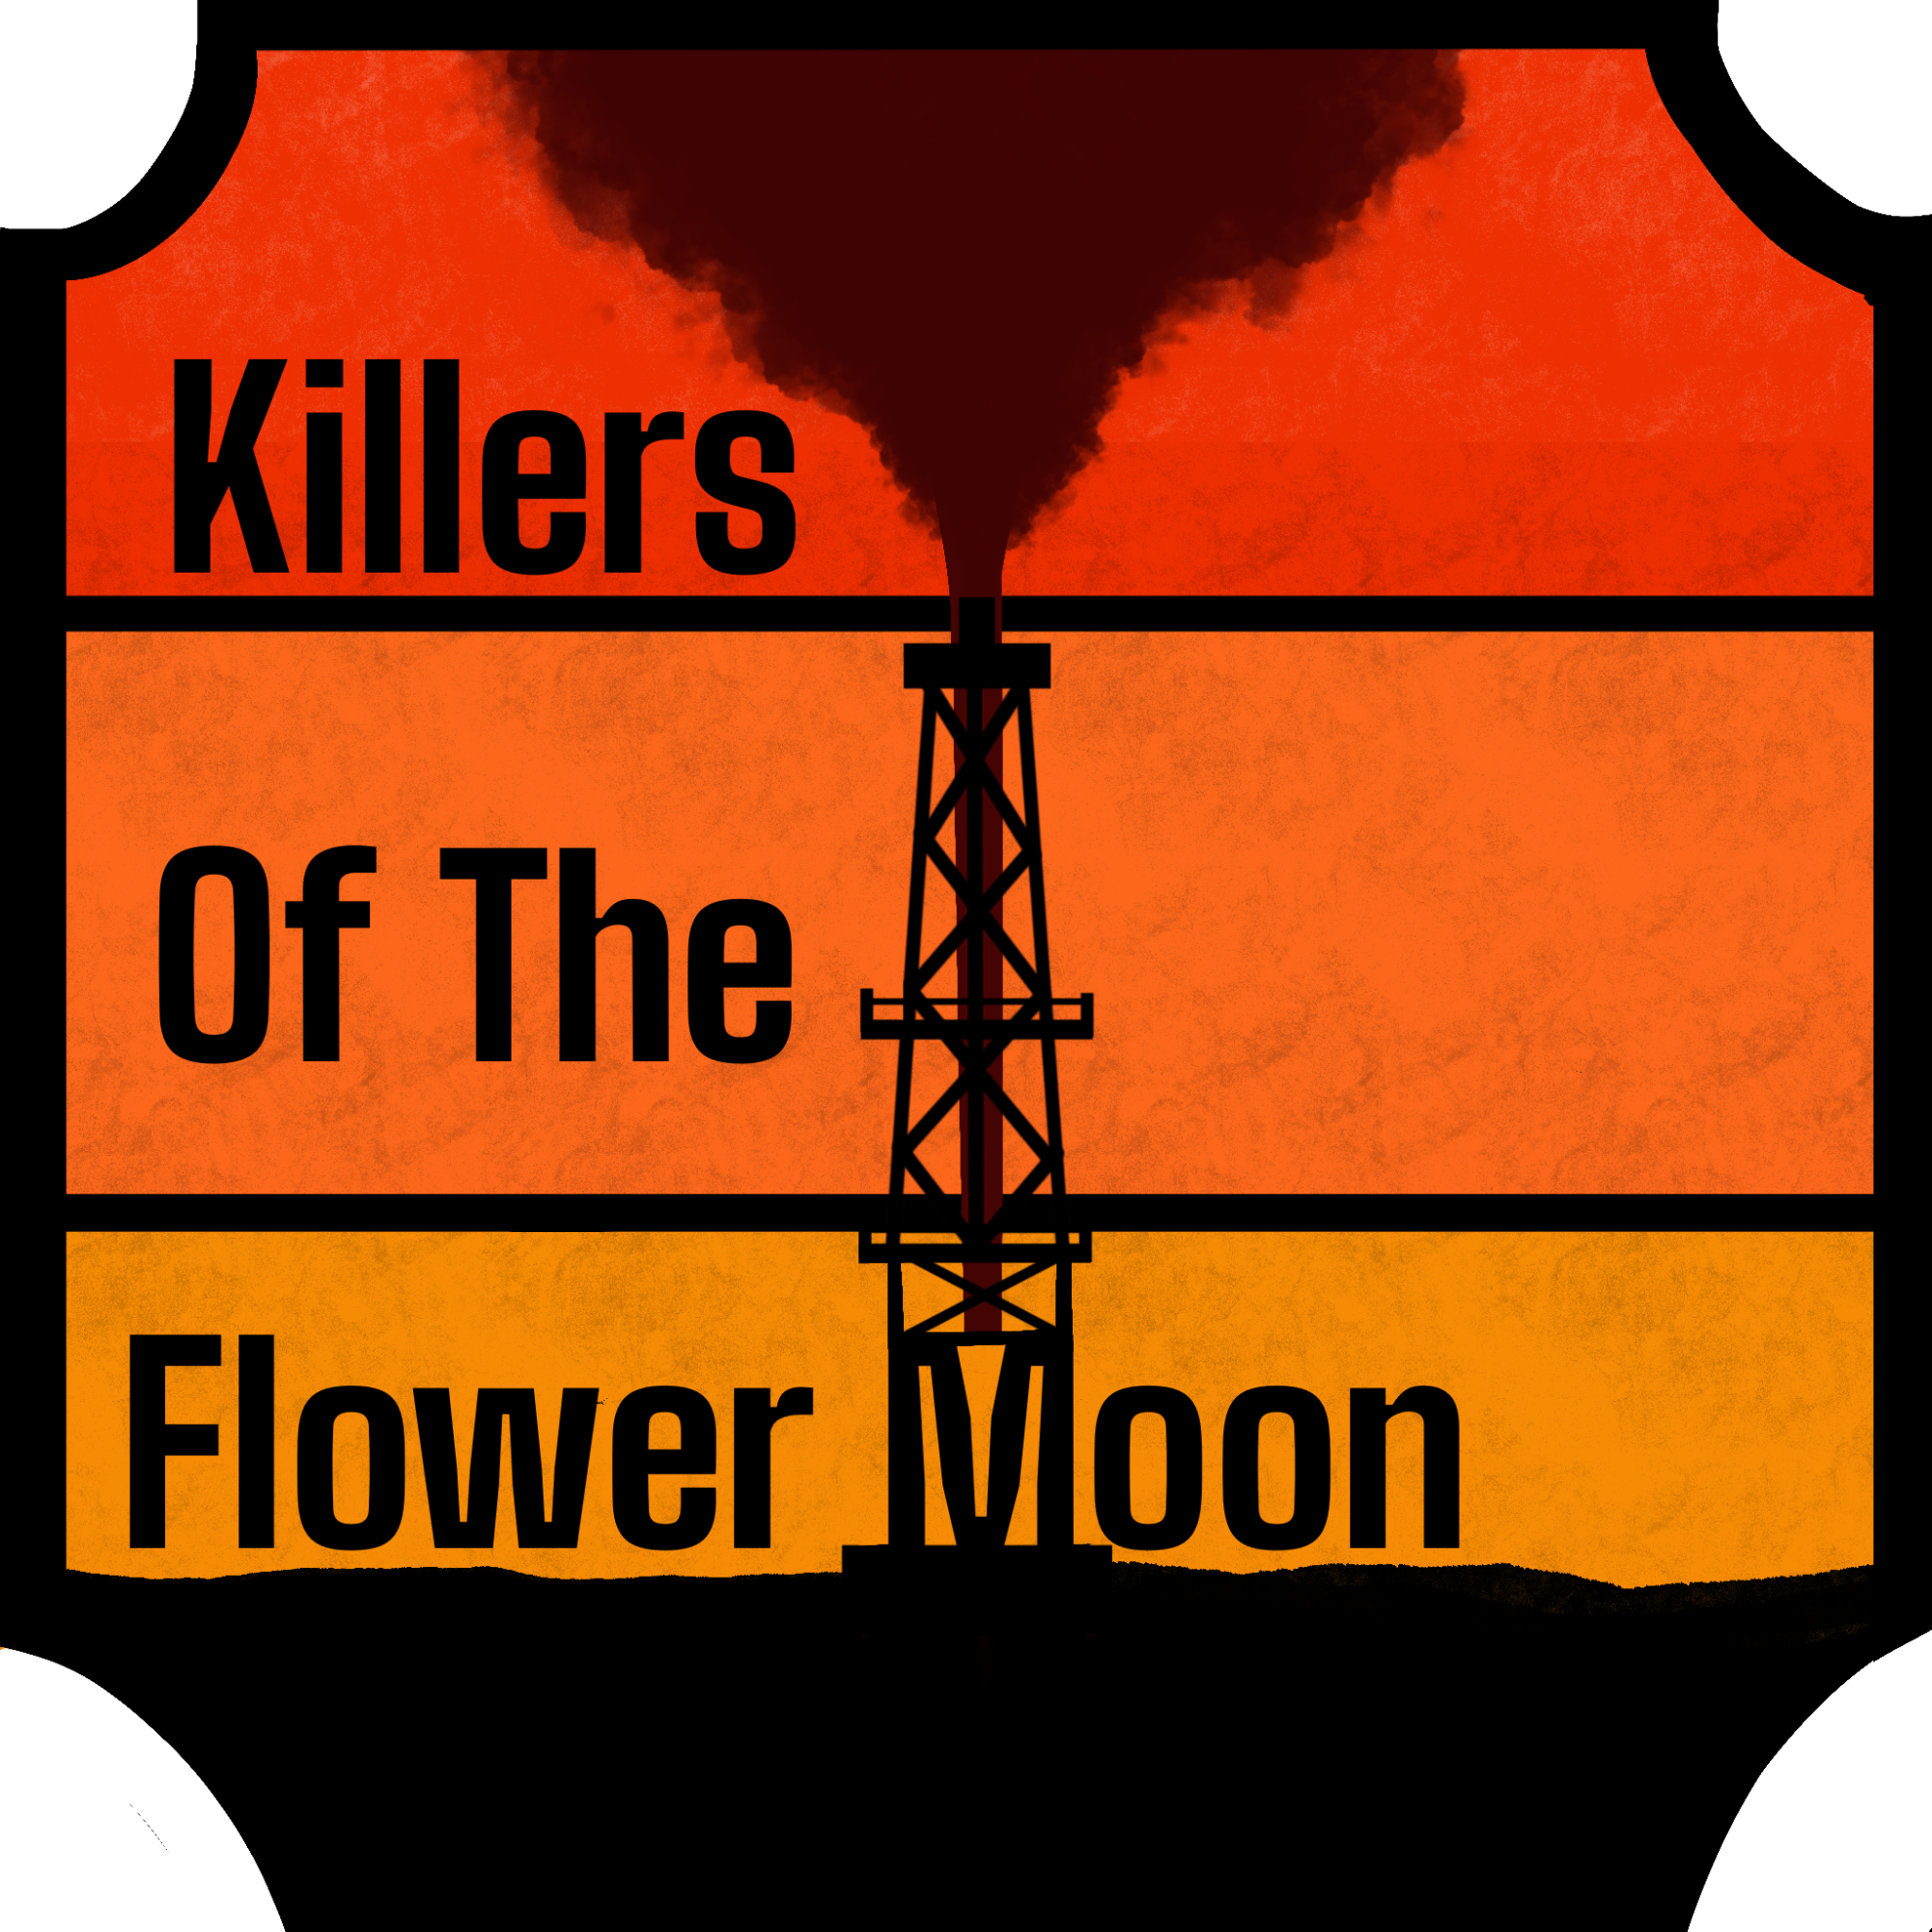 Killers of the Flower Moon is a 'masterpiece' and has near perfect